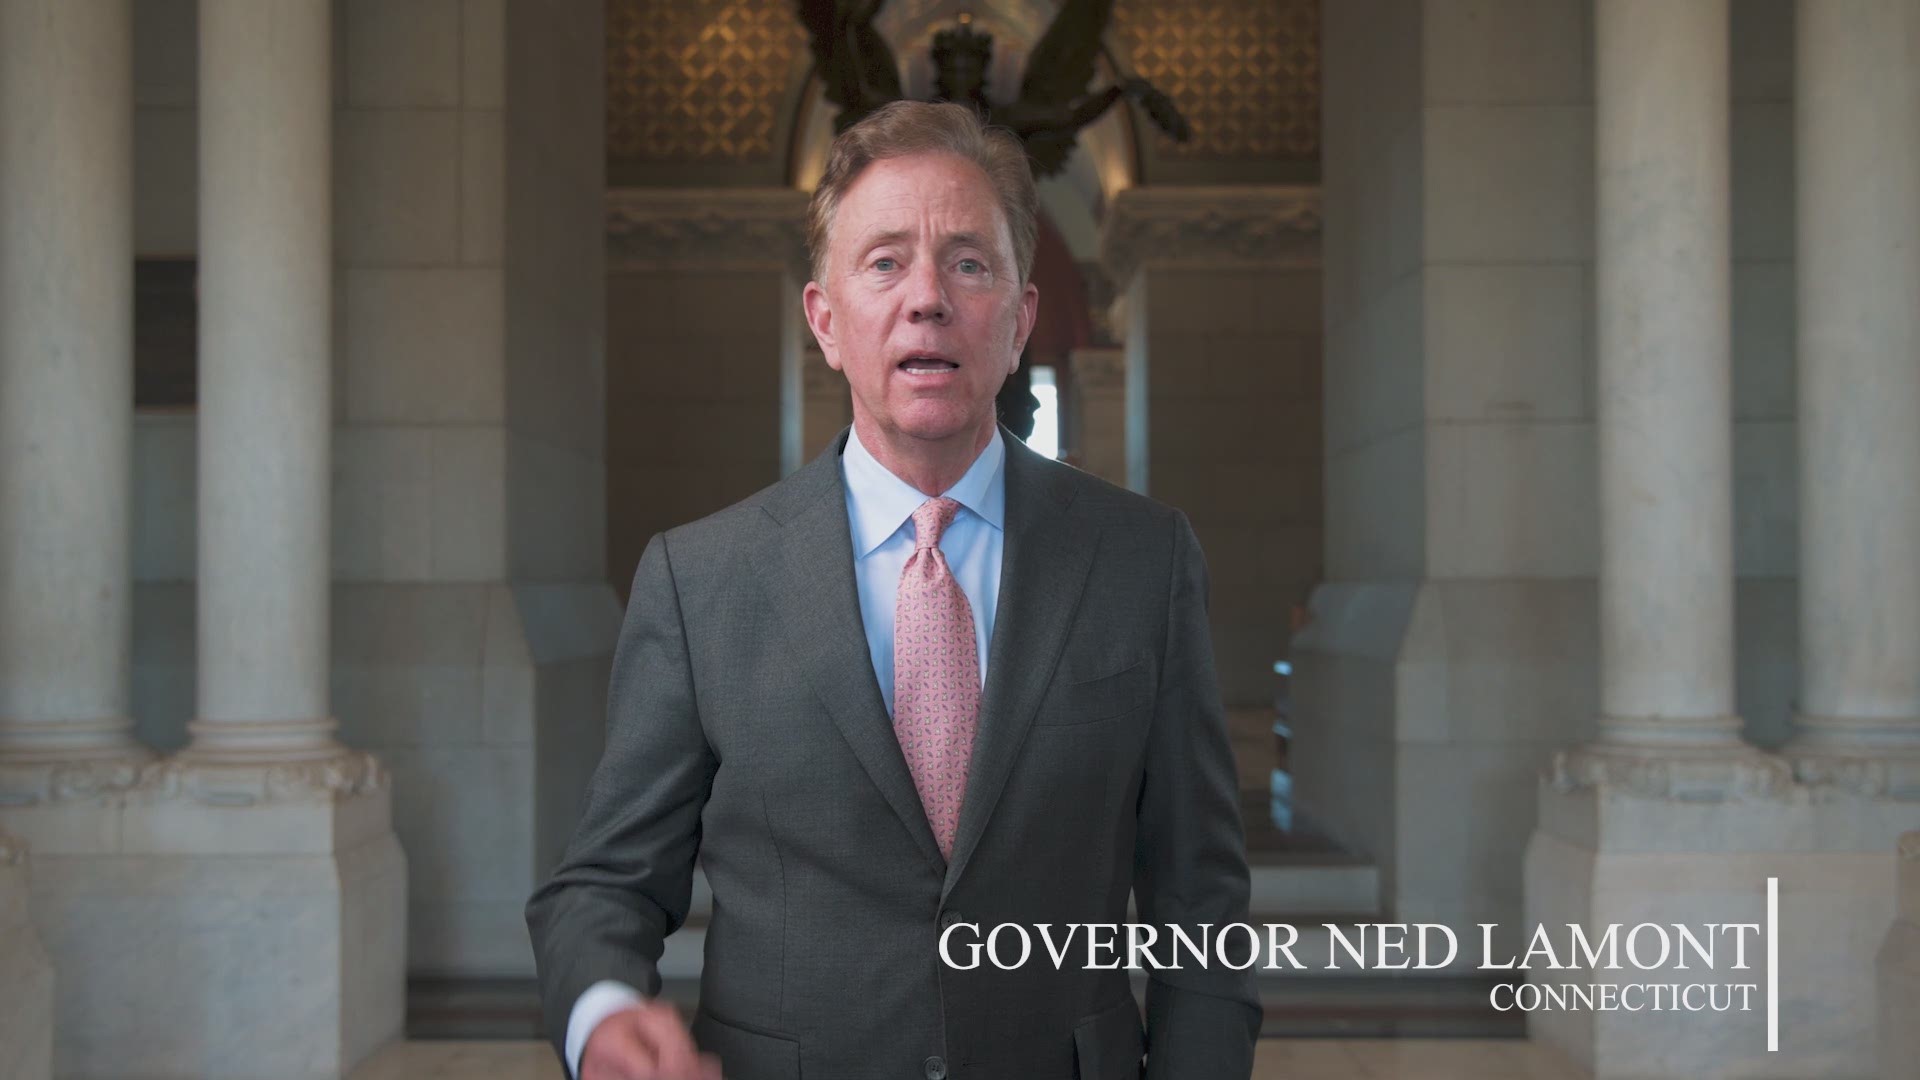 Governor Lamont is calling on Connecticut residents to step up and join the state's fight against coronavirus.